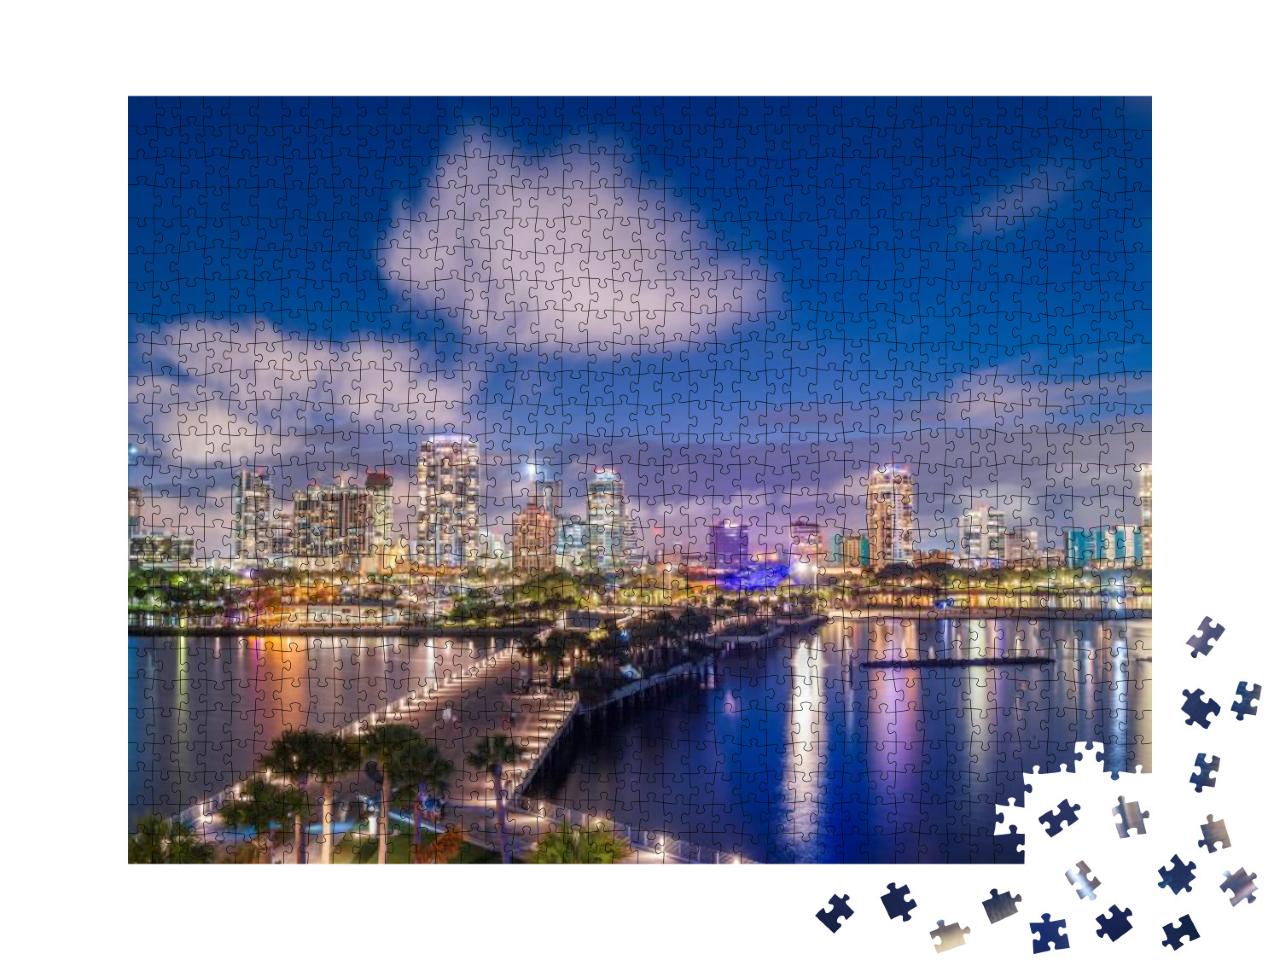 St. Pete, Florida, USA Downtown City Skyline from the Pier... Jigsaw Puzzle with 1000 pieces